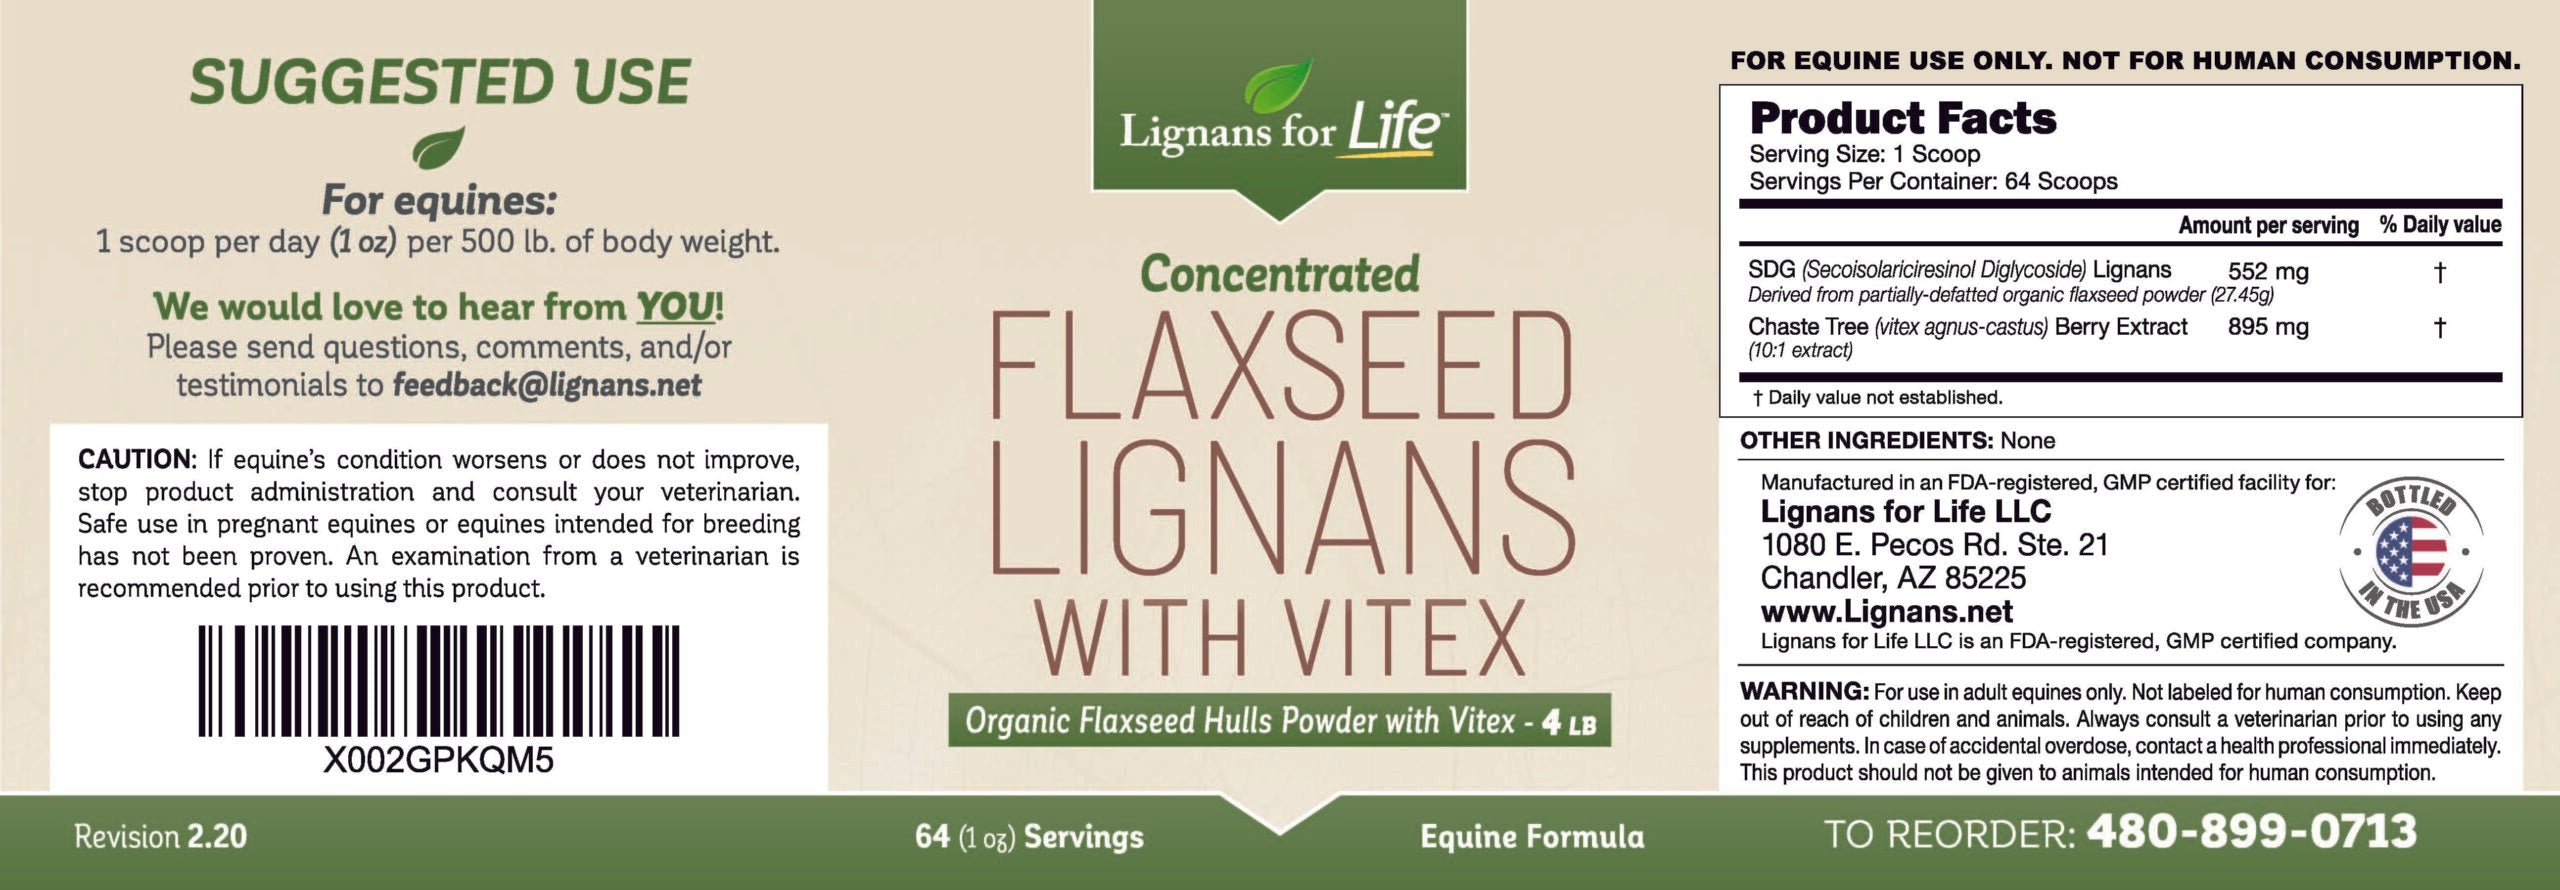 Concentrated Flaxseed Lignans with Vitex